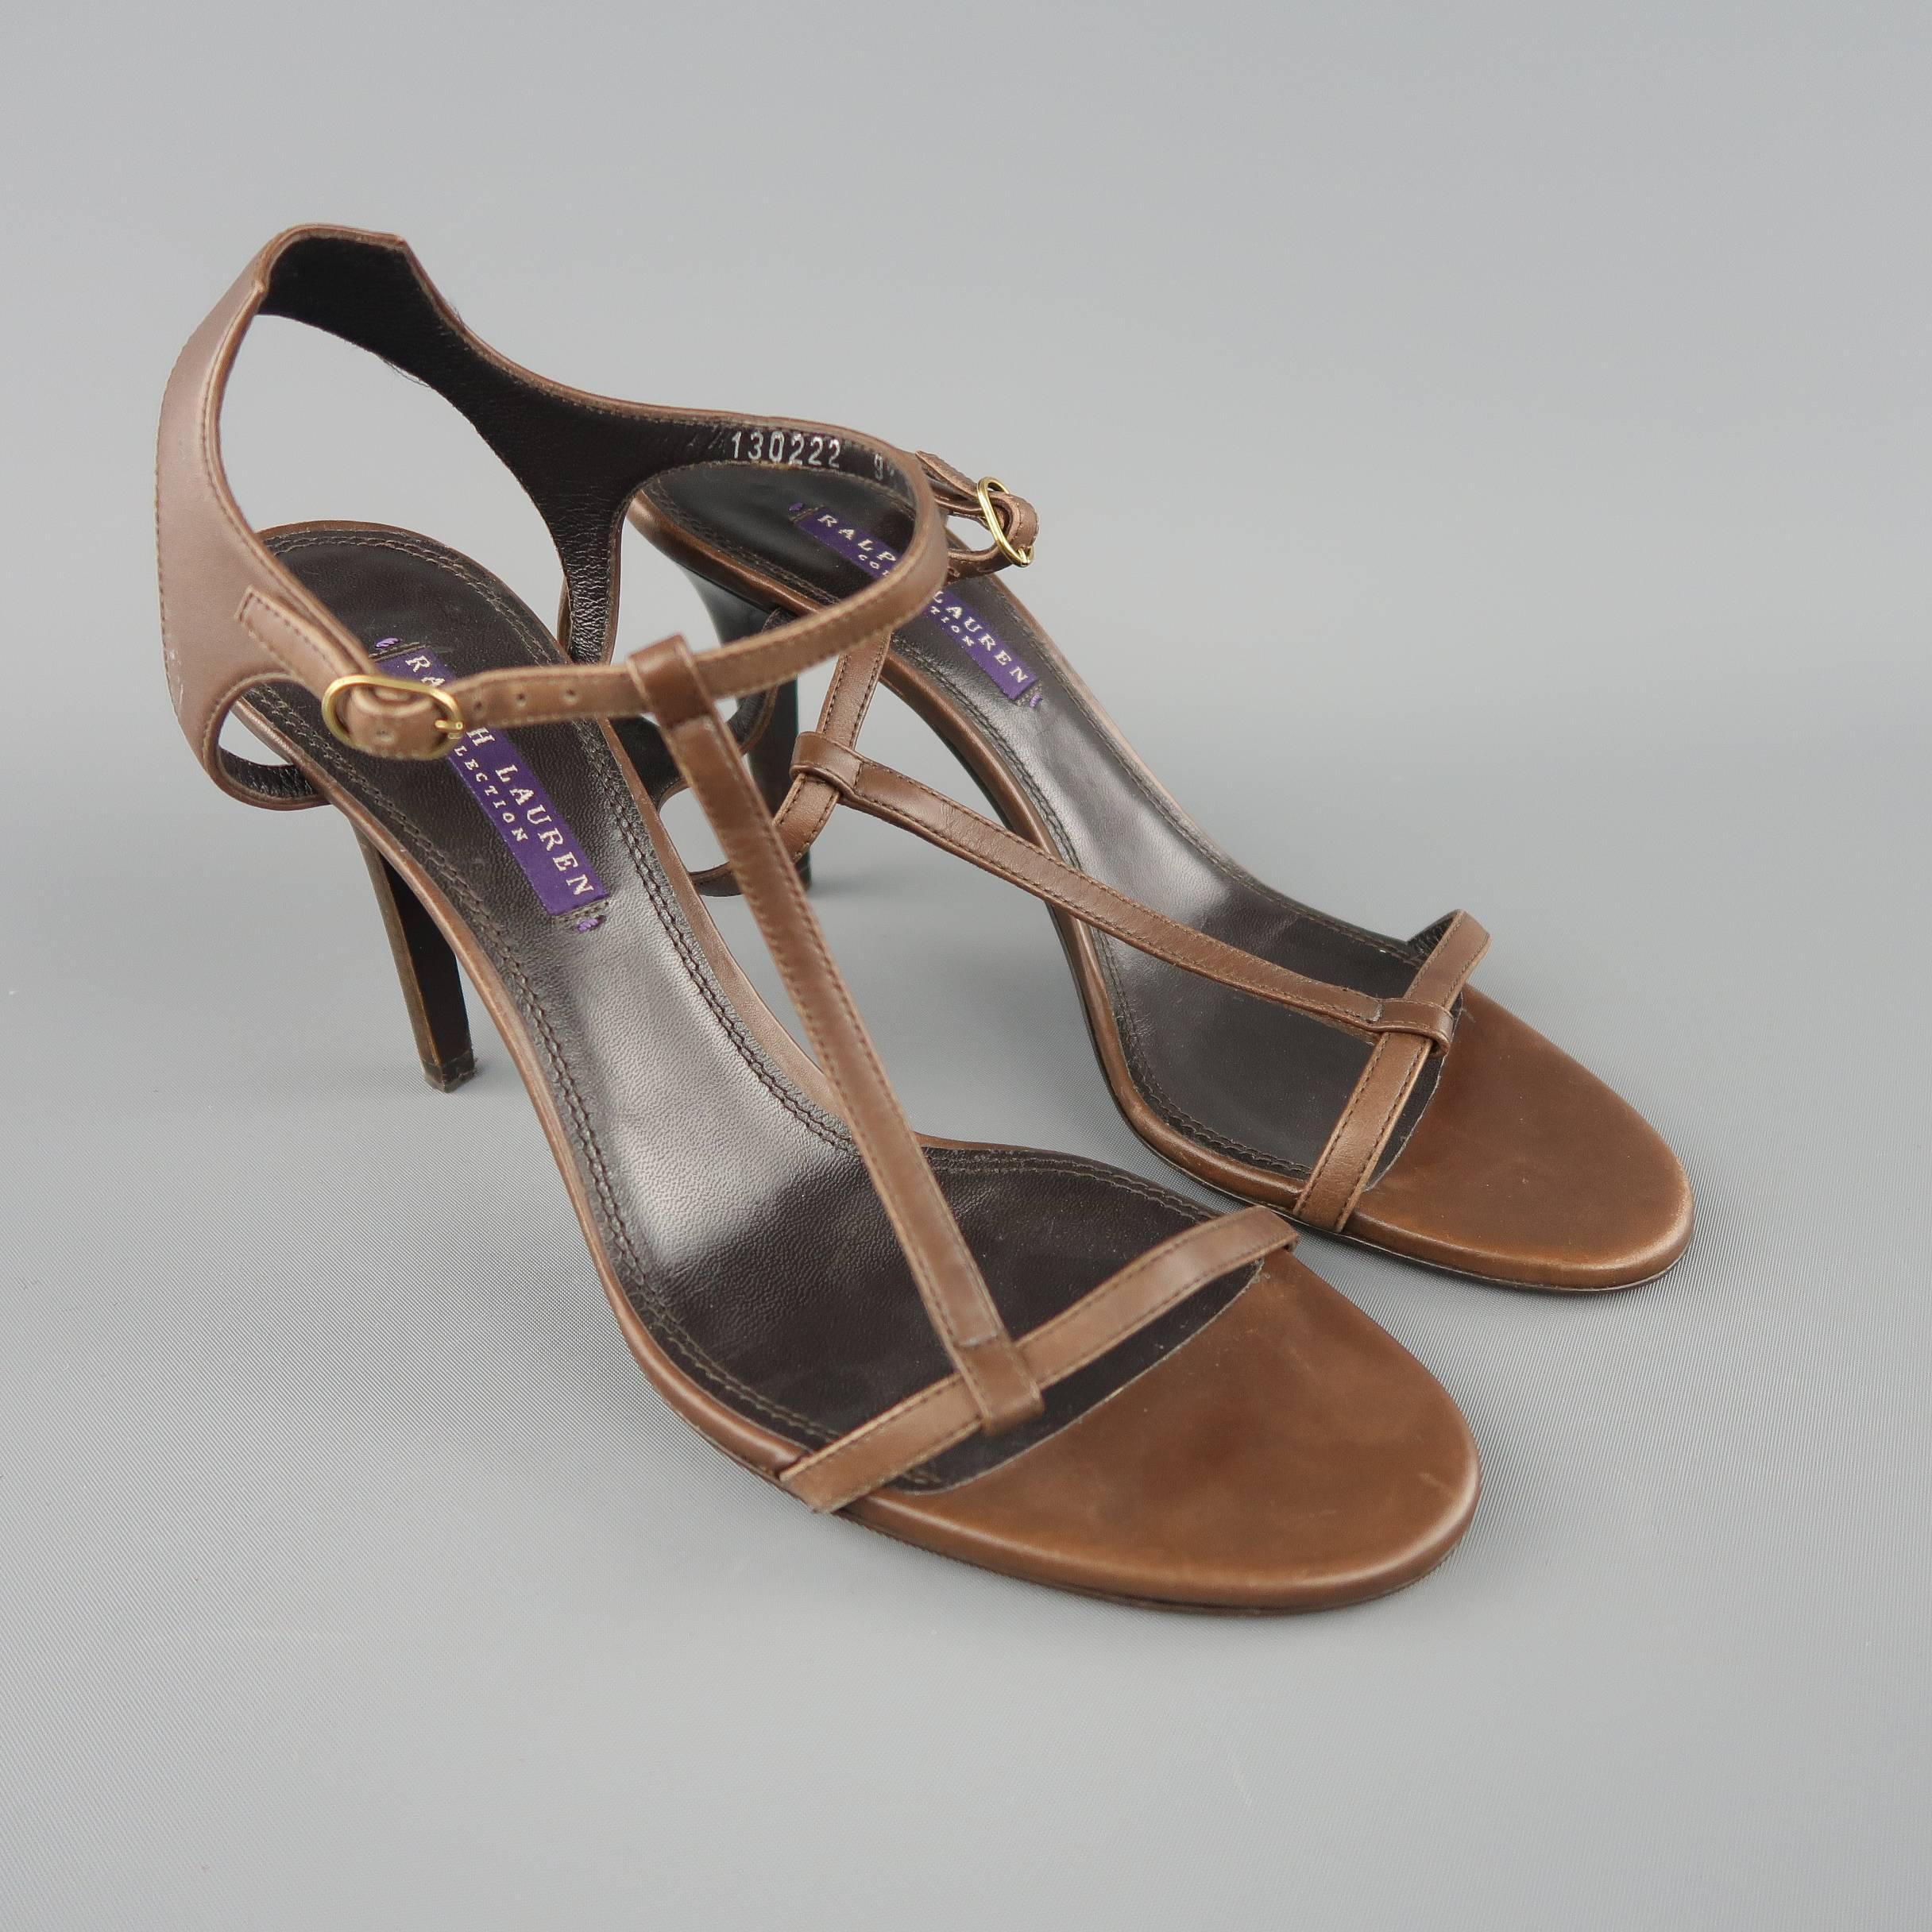 RALPH LAUREN COLLECTION sandals come in brown leather with an ankle harness and T strap. Made in Italy.
 
Good Pre-Owned Condition.
Marked: IT 39.5
 
Measurements:
 
Heel: 4 in.
